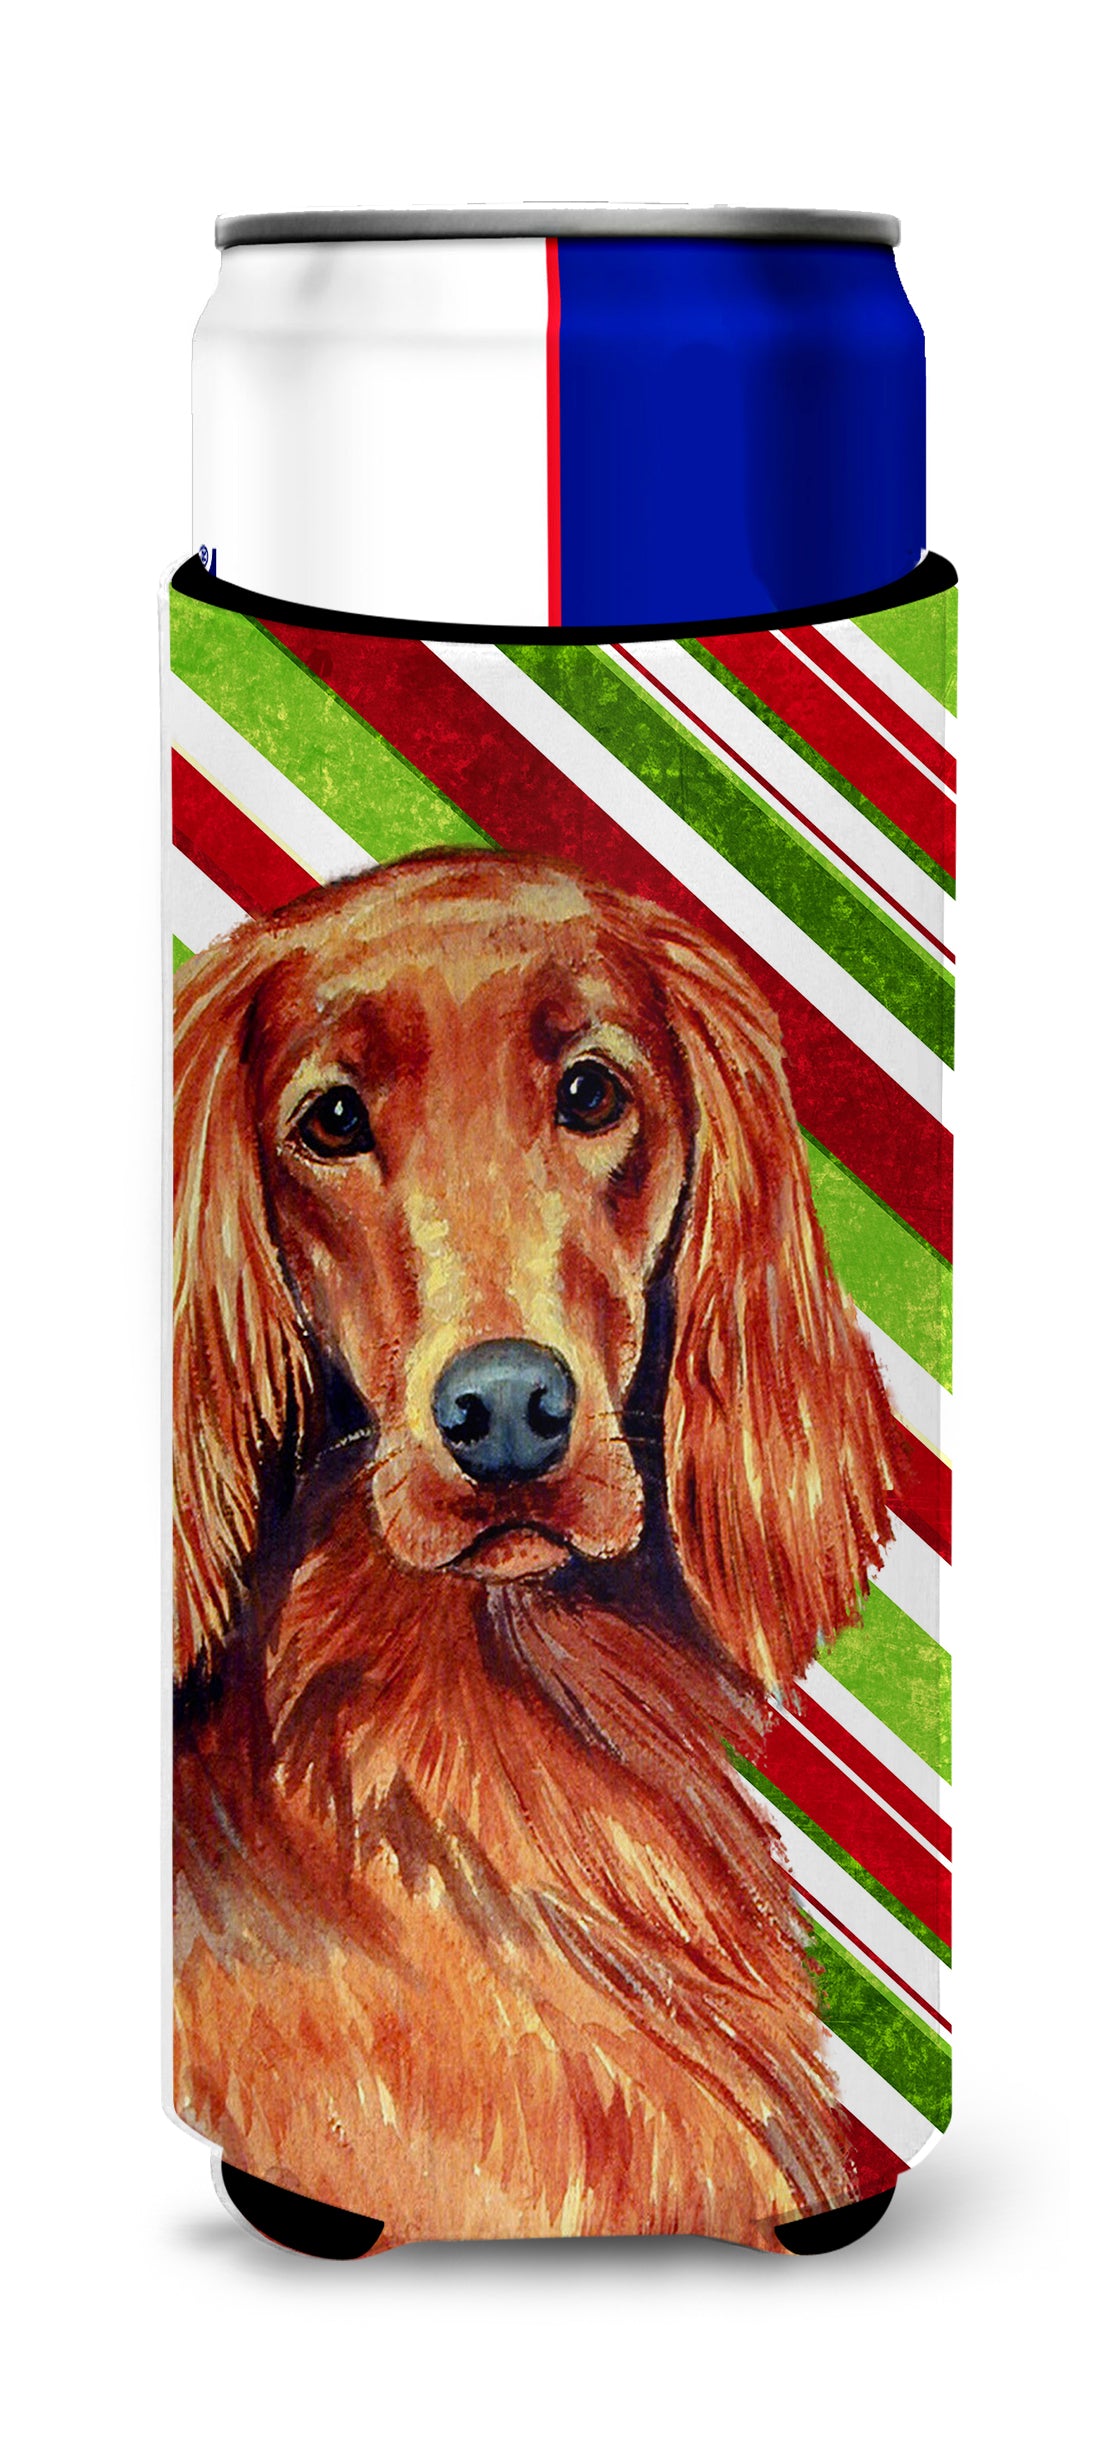 Irish Setter Candy Cane Holiday Christmas Ultra Beverage Insulators for slim cans LH9254MUK.